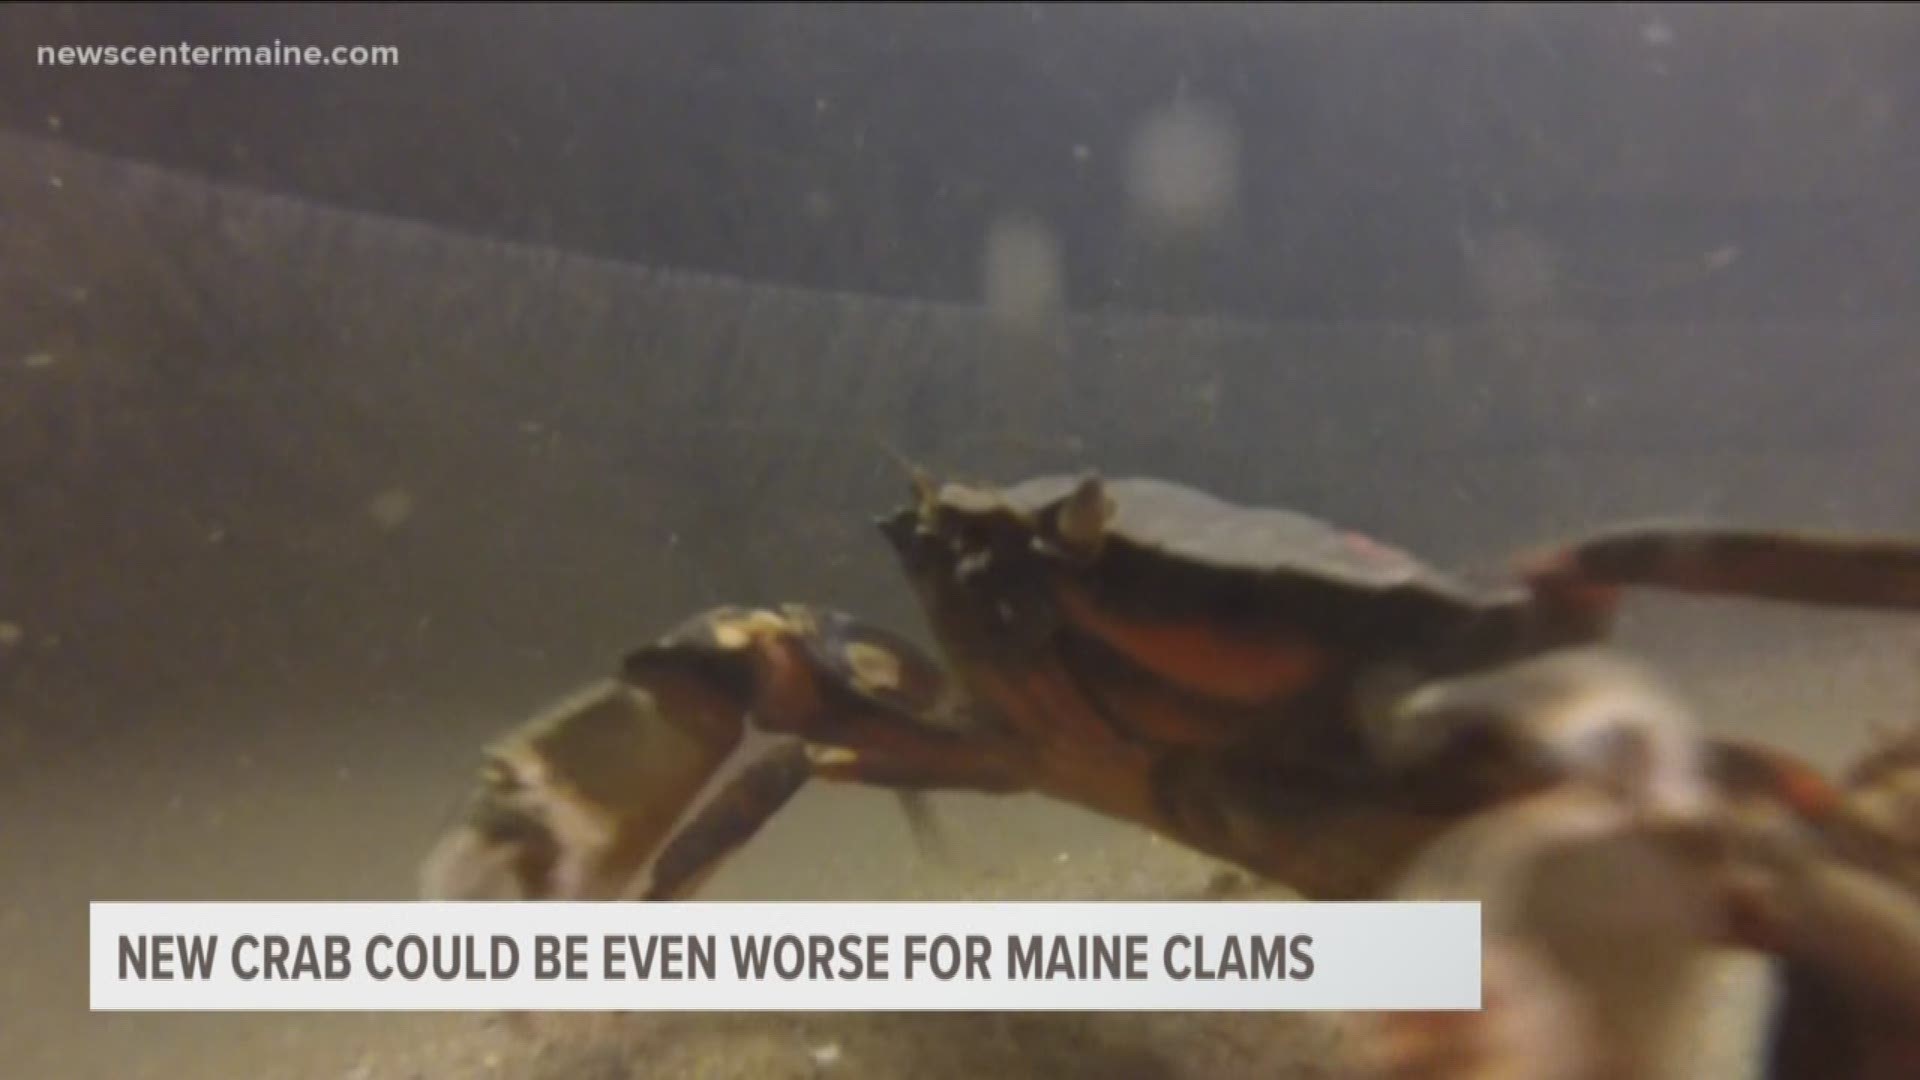 New crab could be even worse for Maine clams